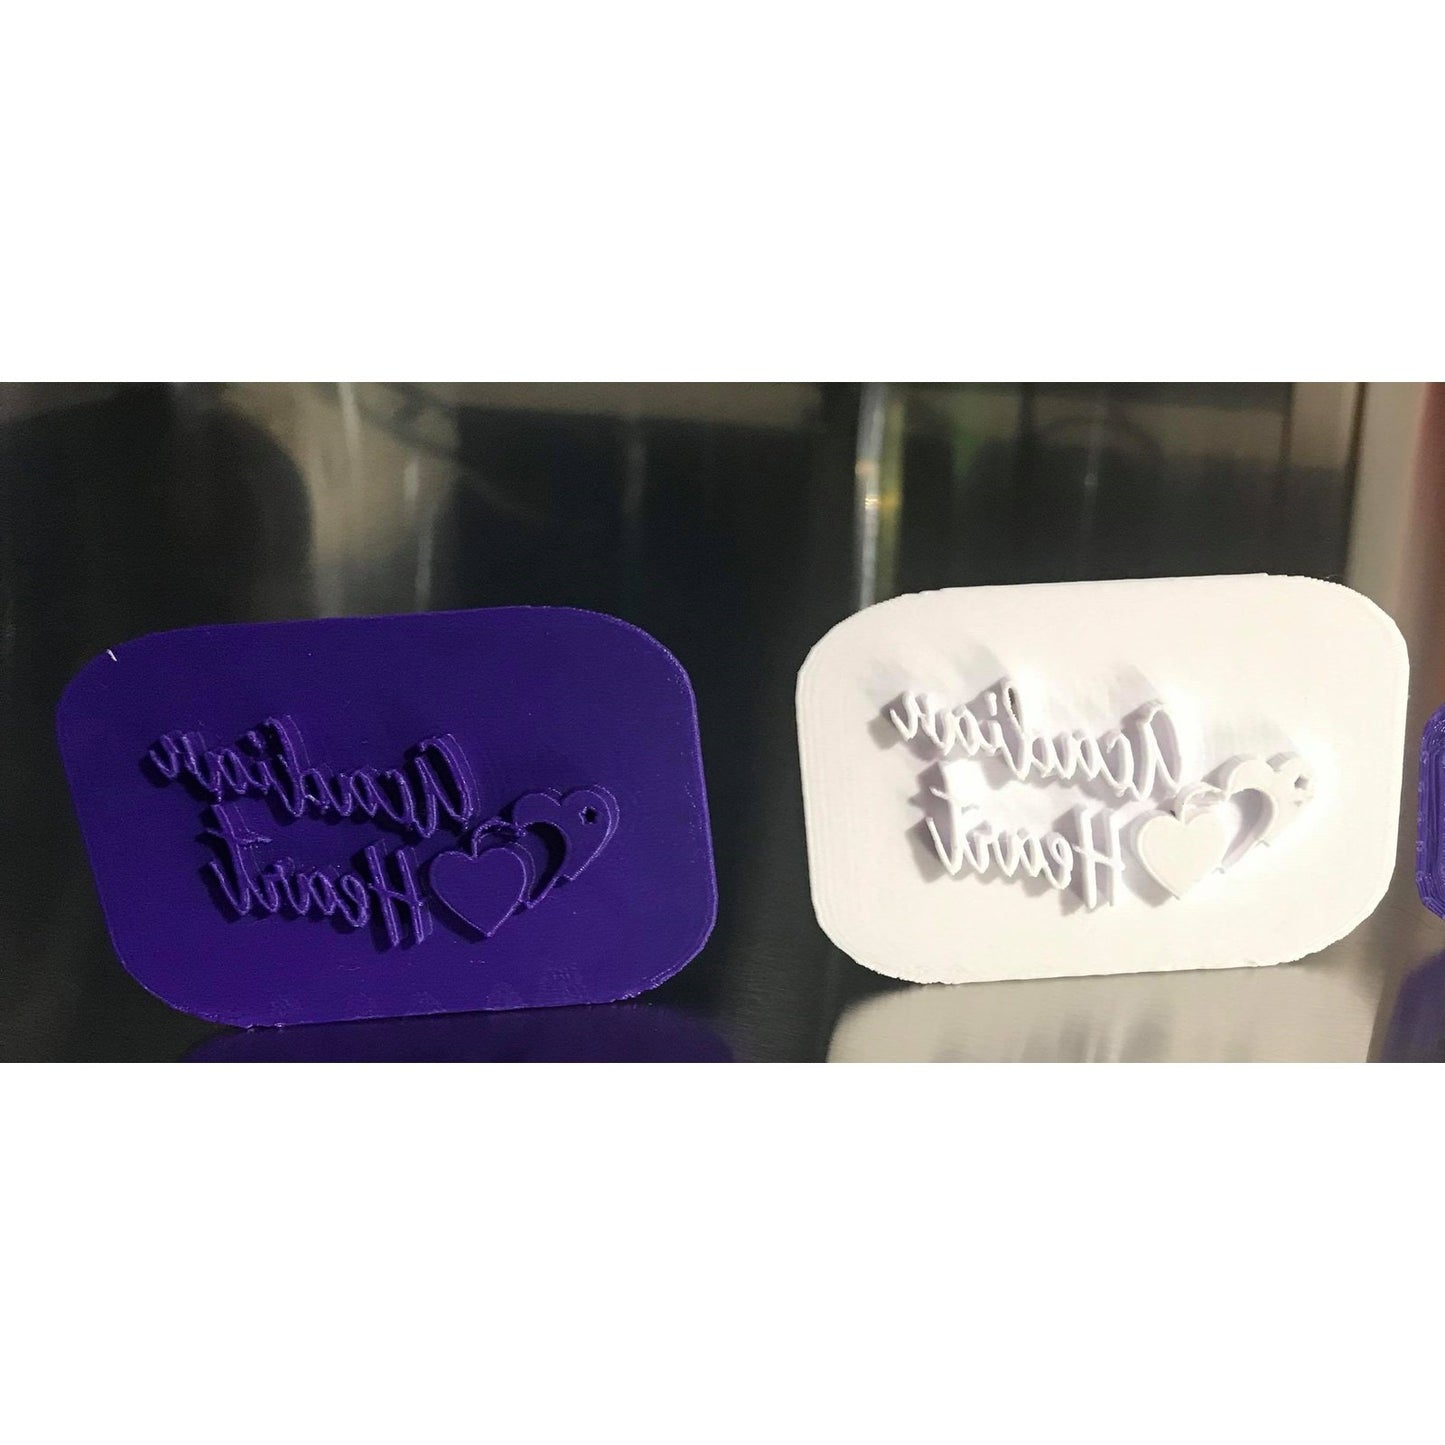 Soap Stamp Order Request